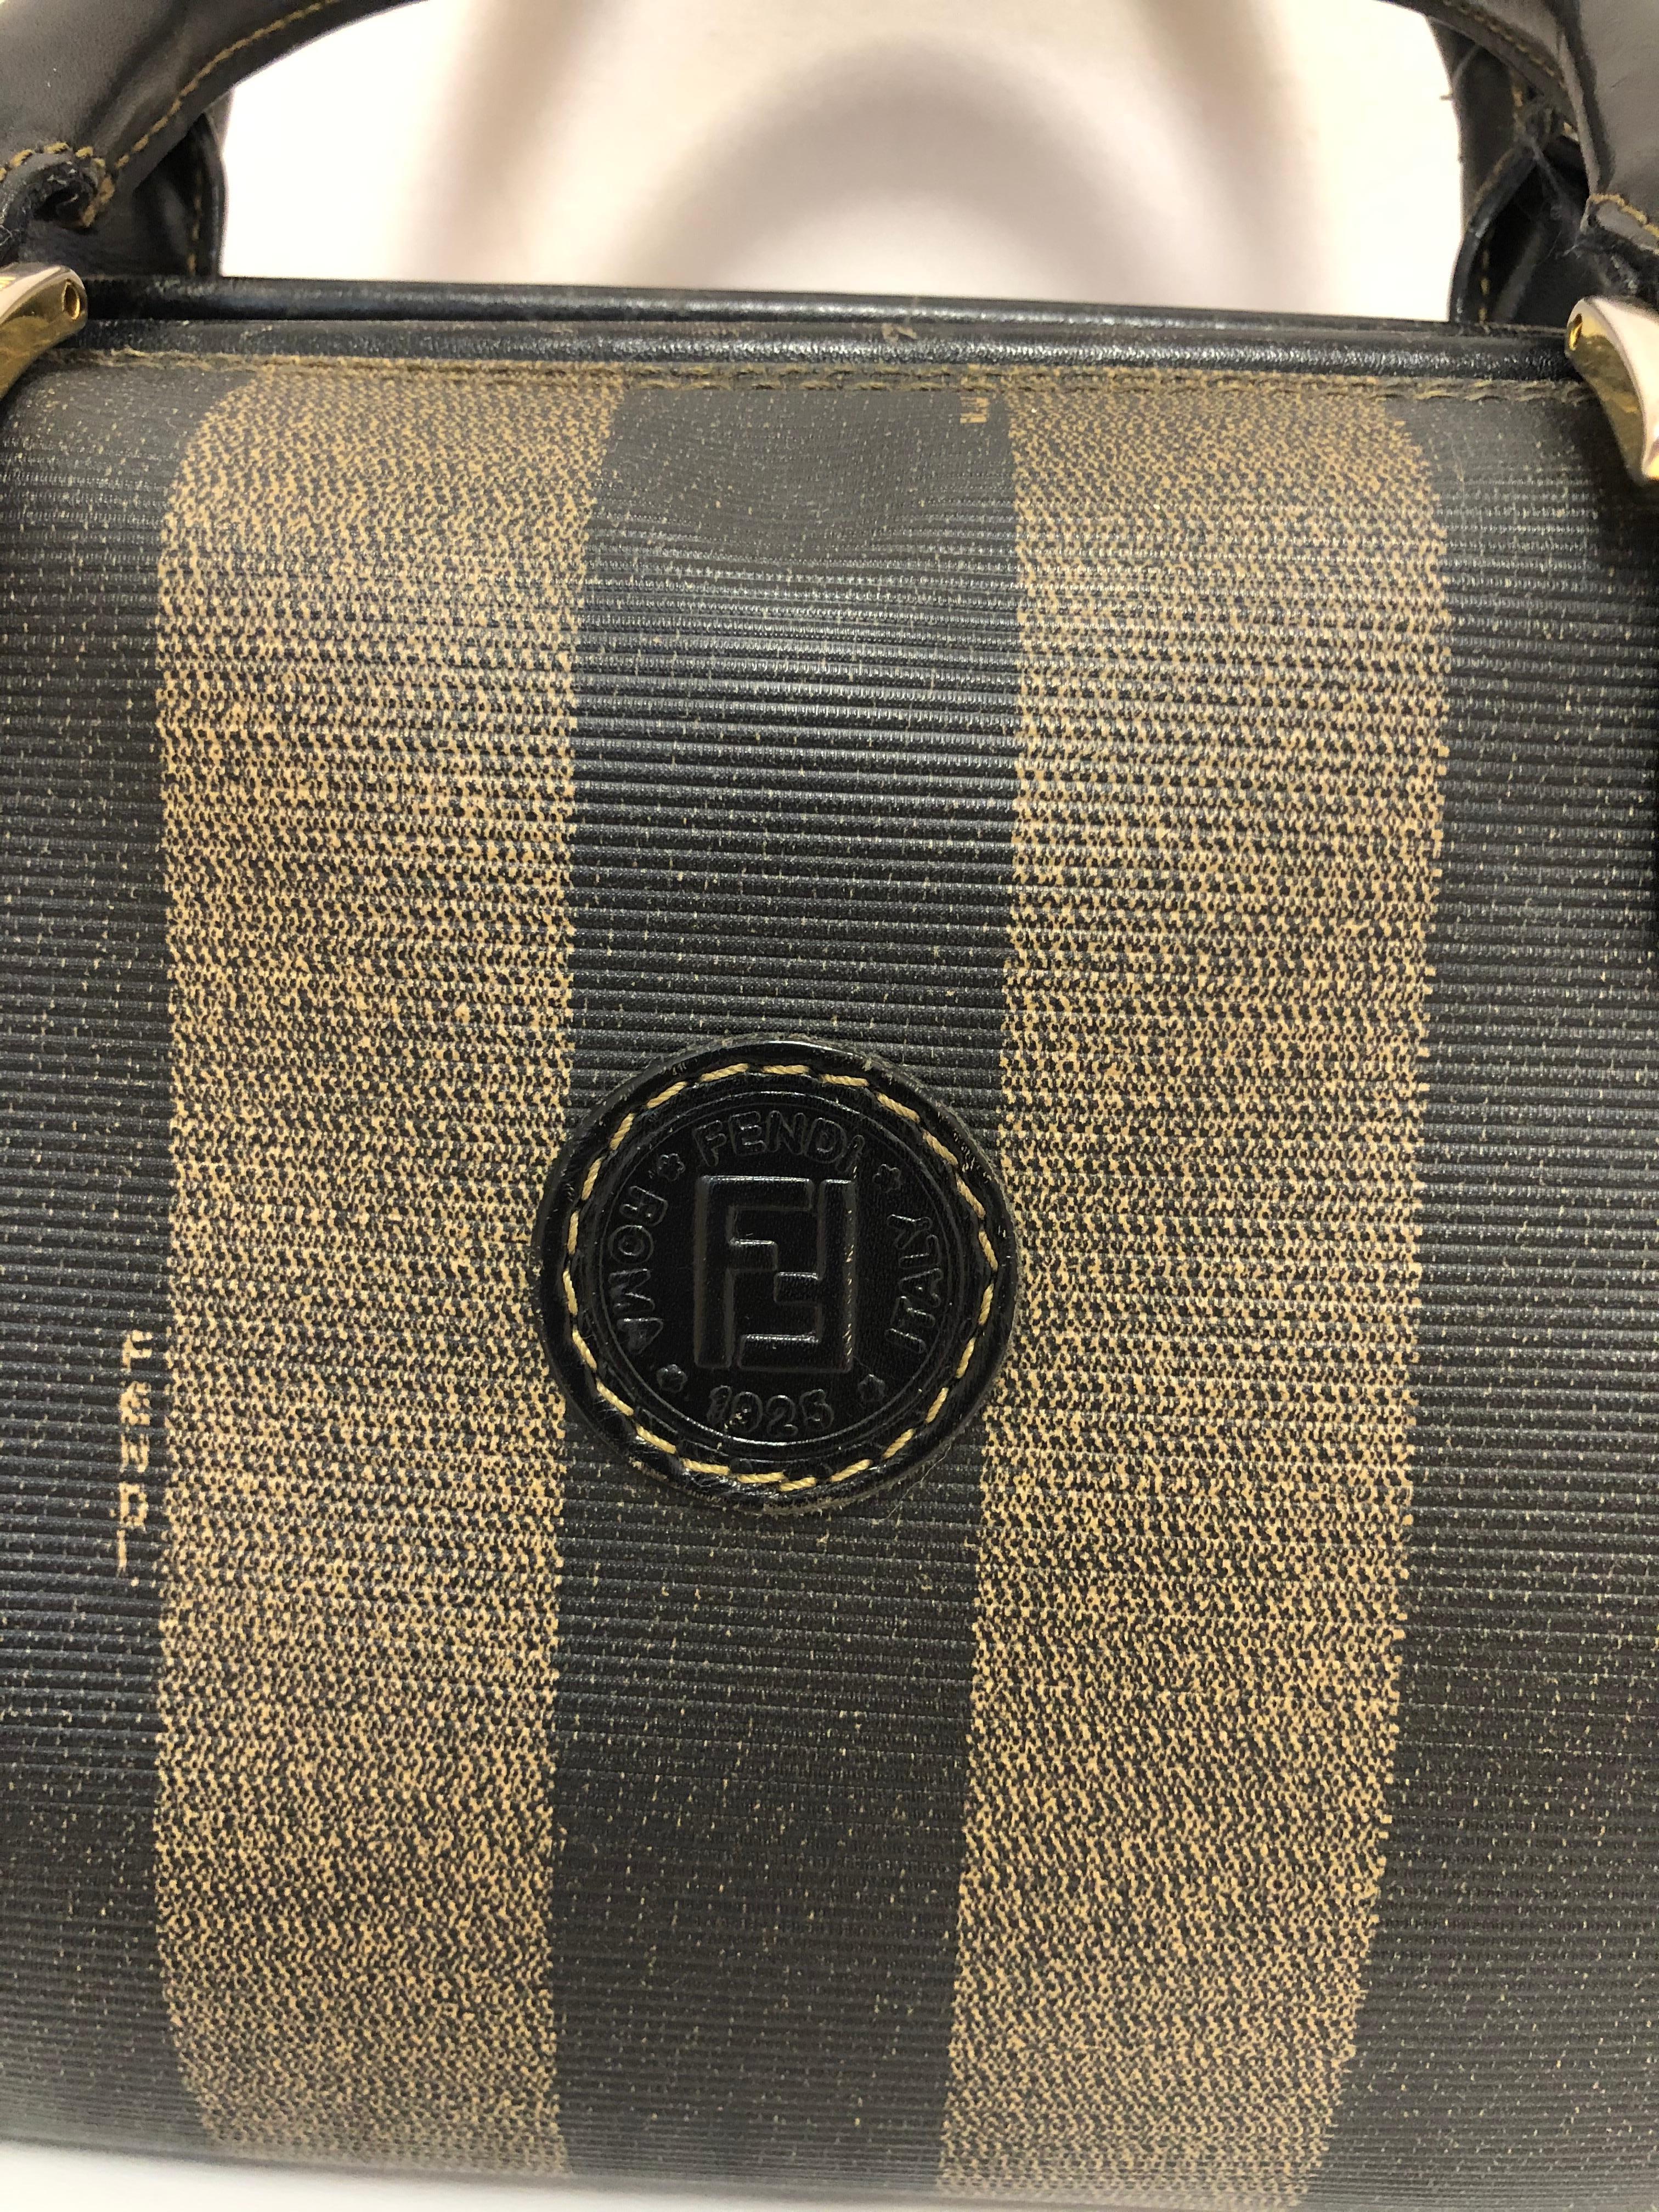 Classic Fendi bag in coated canvas crafted in brown and black, with a black fabric lining. There are two rolled handlesand goldtone hardware. The bag is in very good condition with the exception of two small tears on the lining. I have therefore